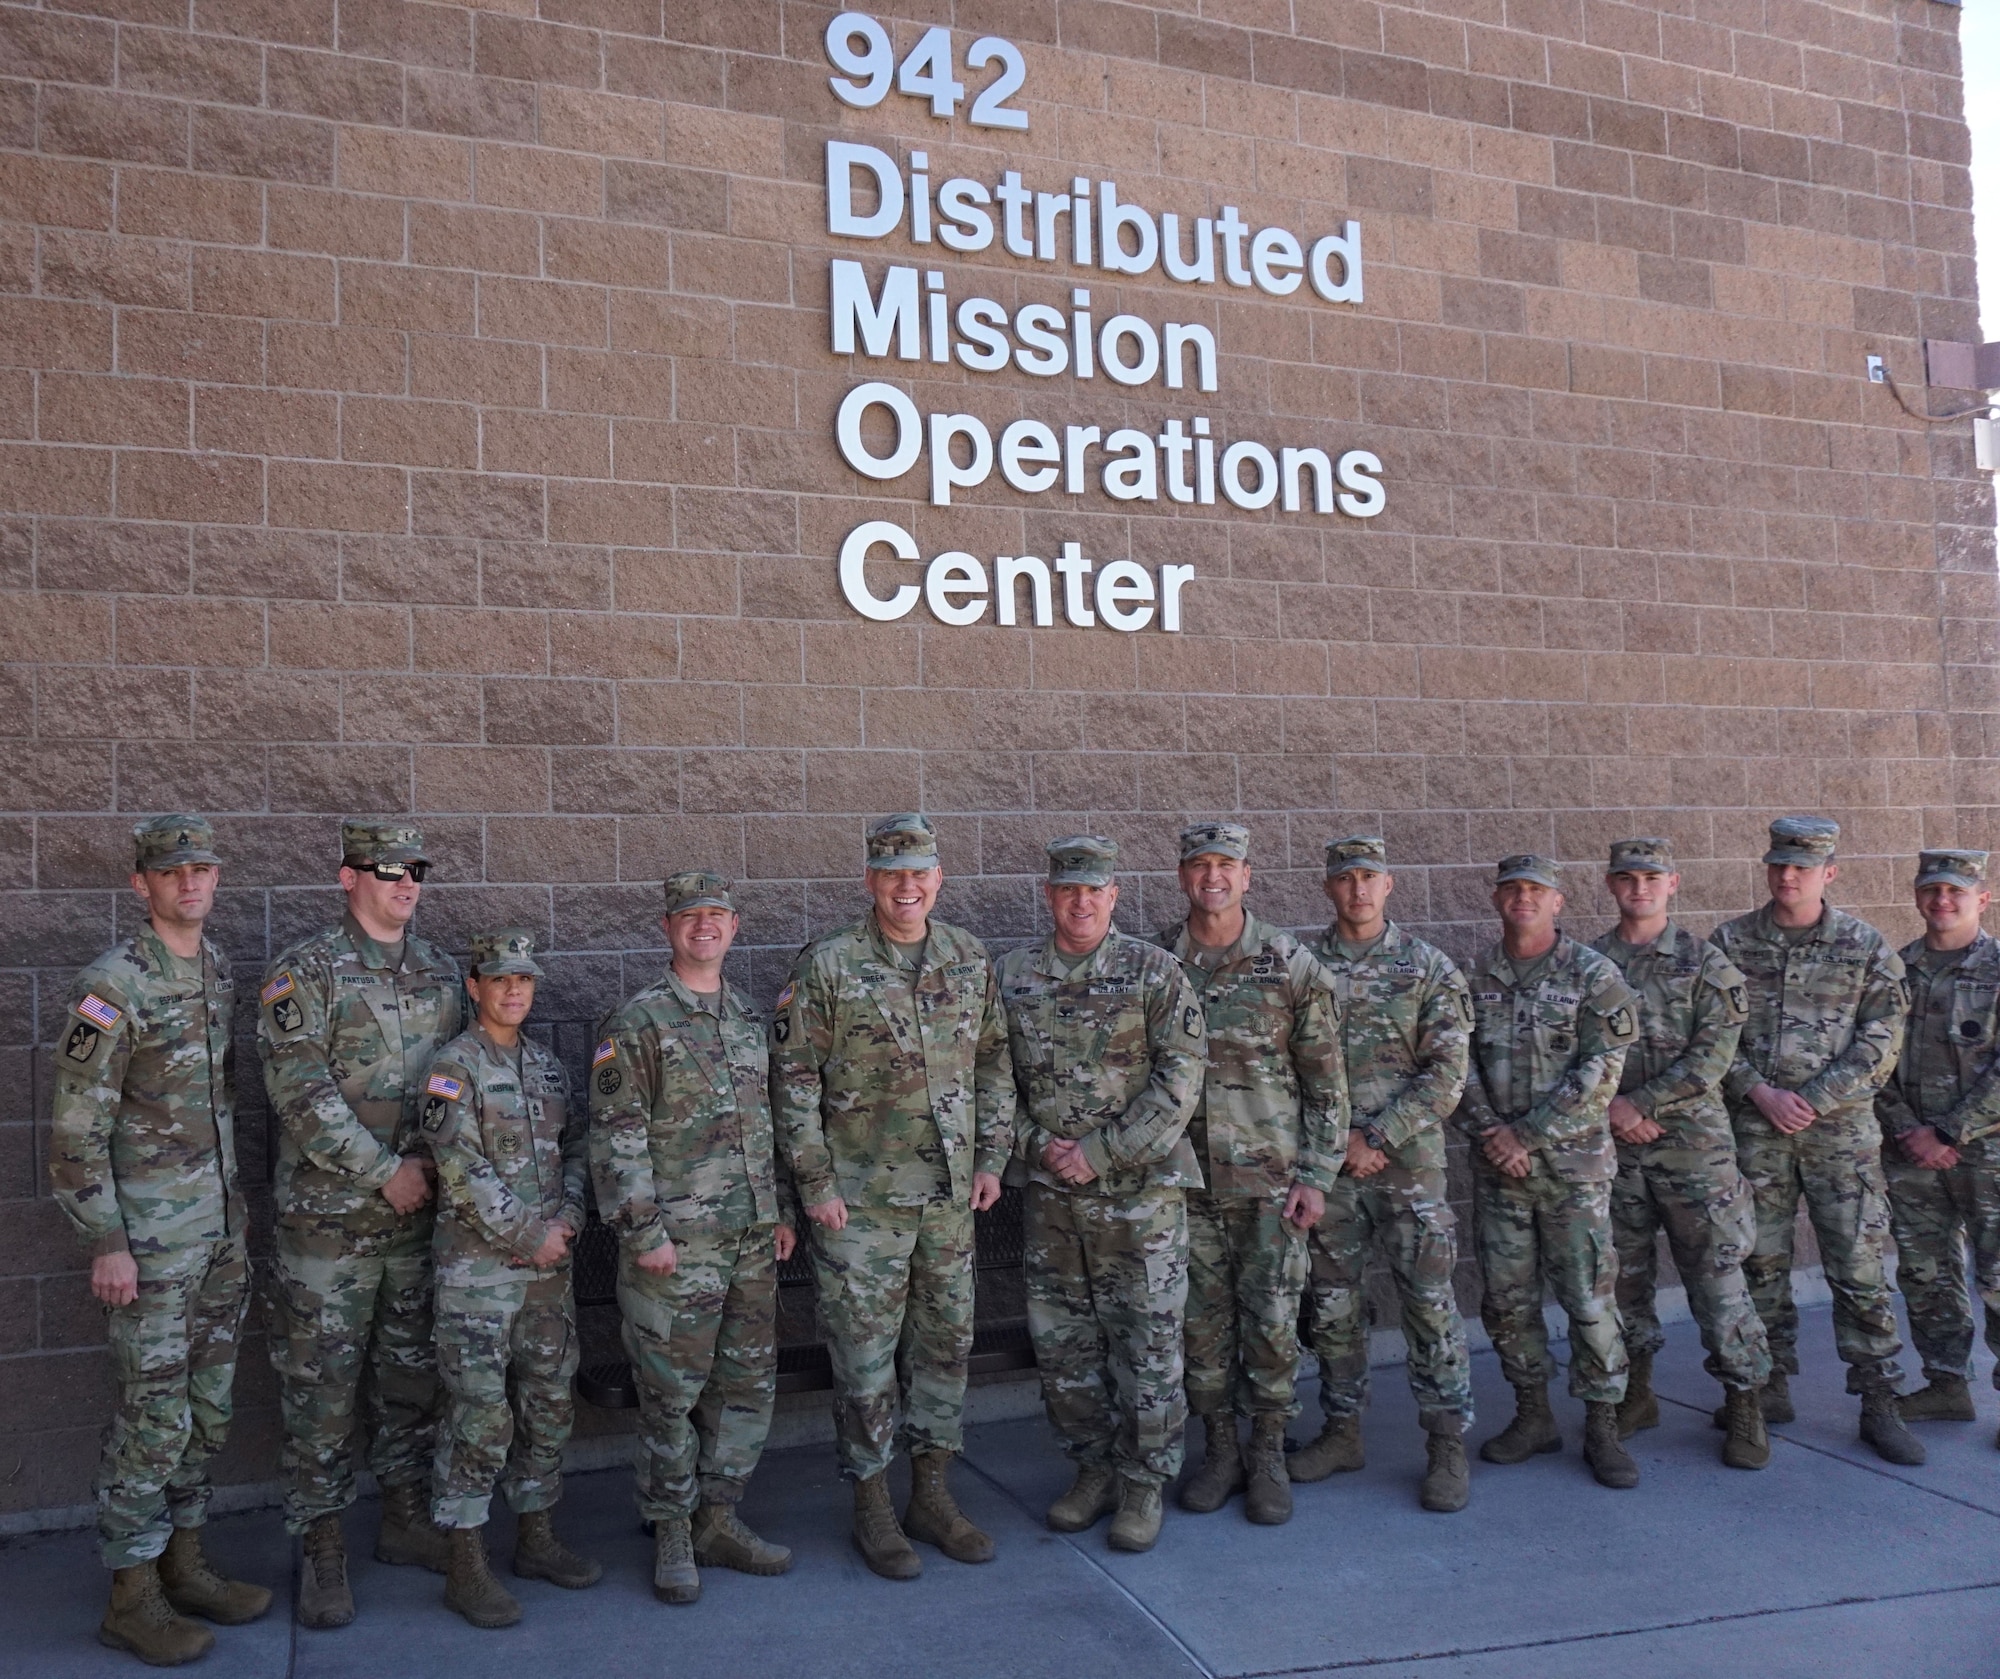 Alt text: uniformed military members stand in front of brick building with lettering “942 Distributed Mission Operations Center”